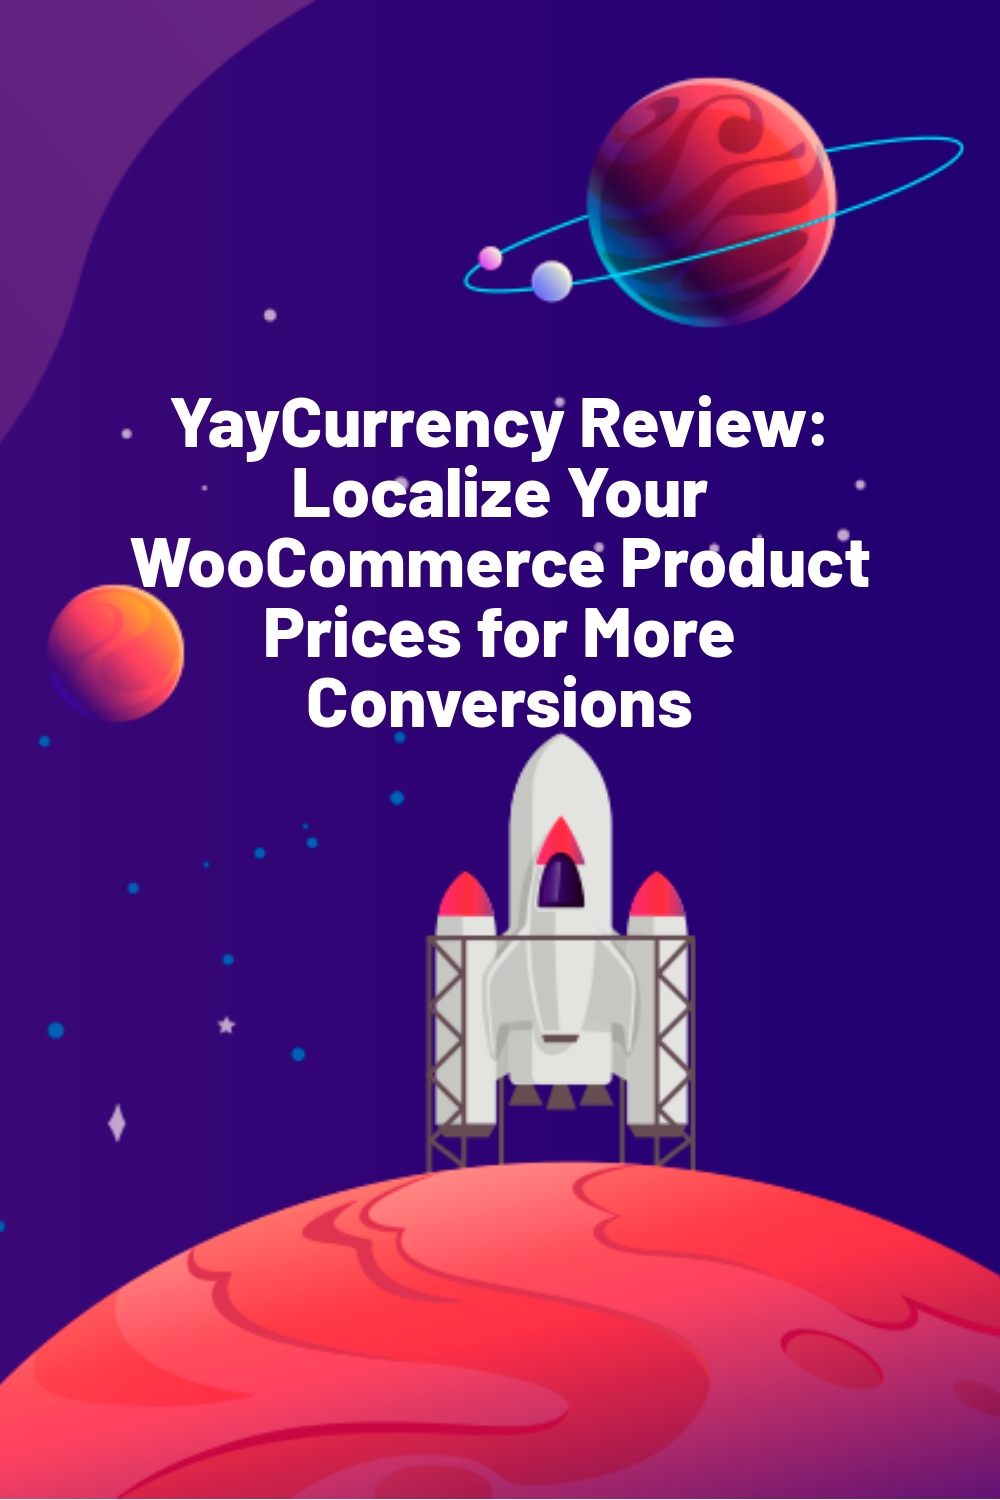 YayCurrency Review: Localize Your WooCommerce Product Prices for More Conversions